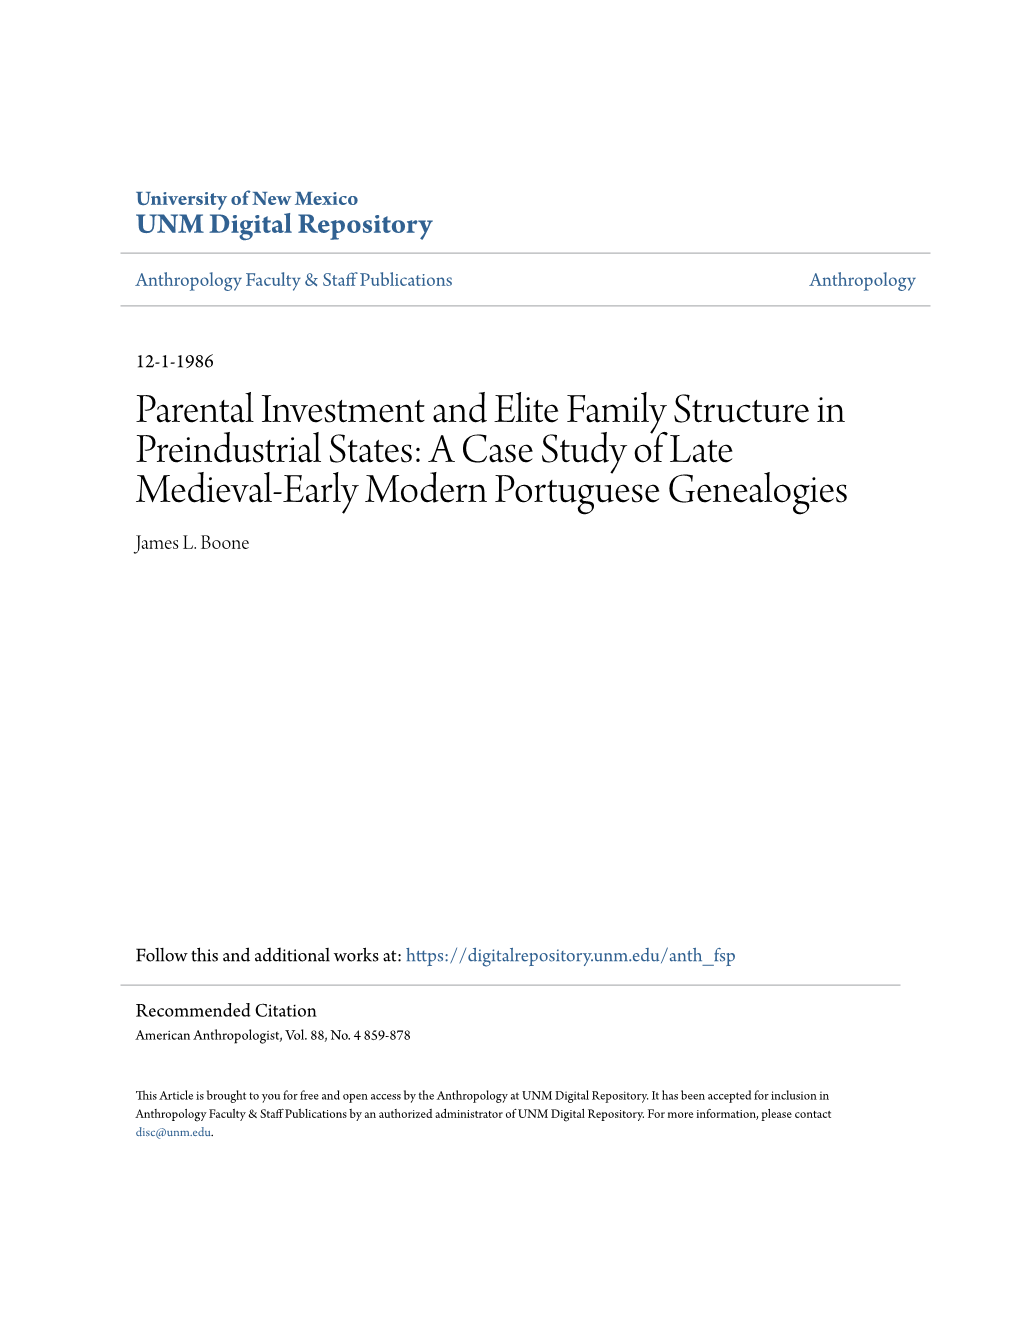 Parental Investment and Elite Family Structure in Preindustrial States: a Case Study of Late Medieval-Early Modern Portuguese Genealogies James L